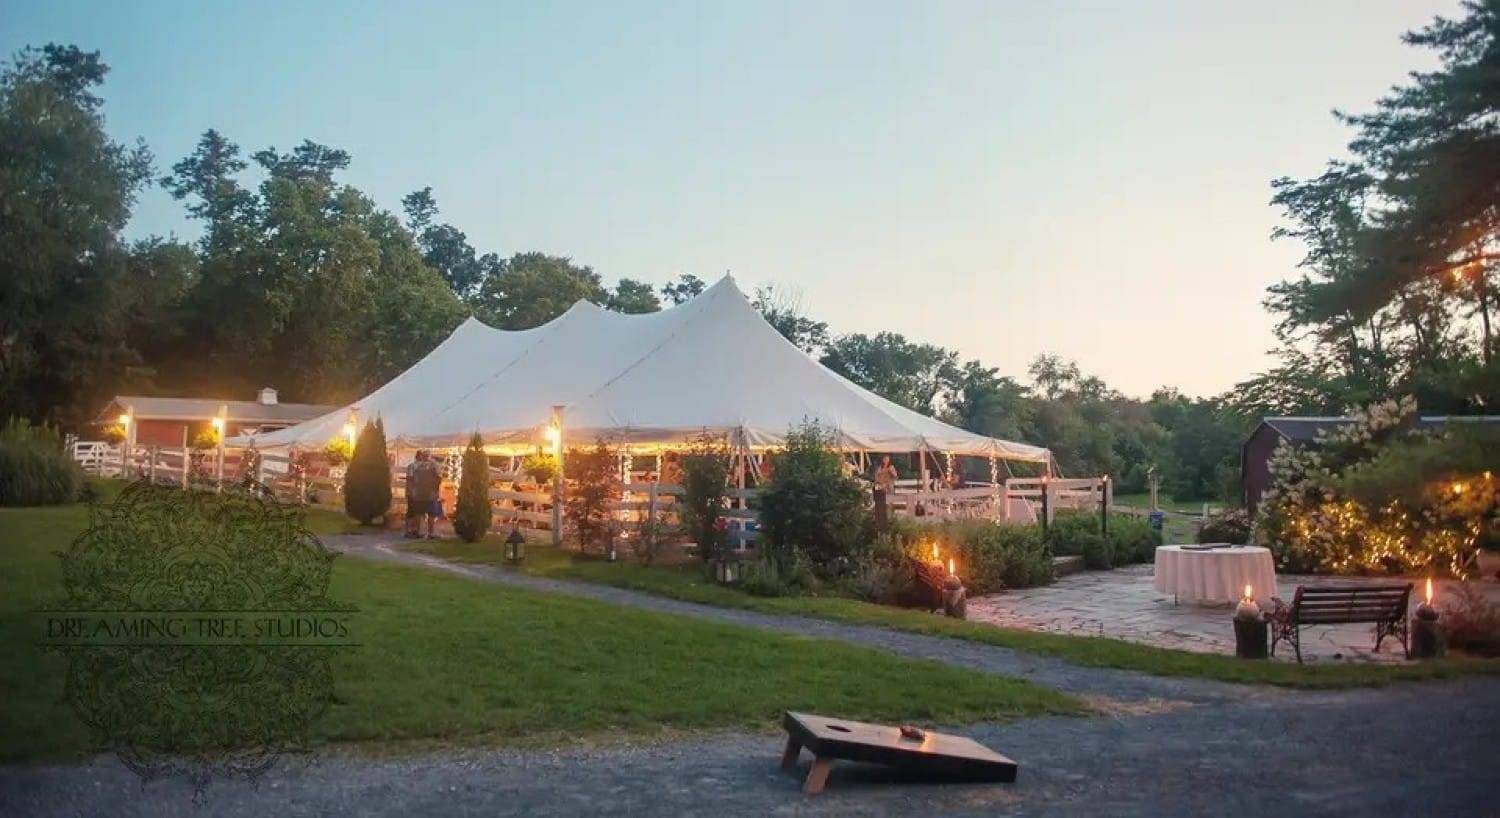 An outdoor tented reception area with gloowing lights at dusk